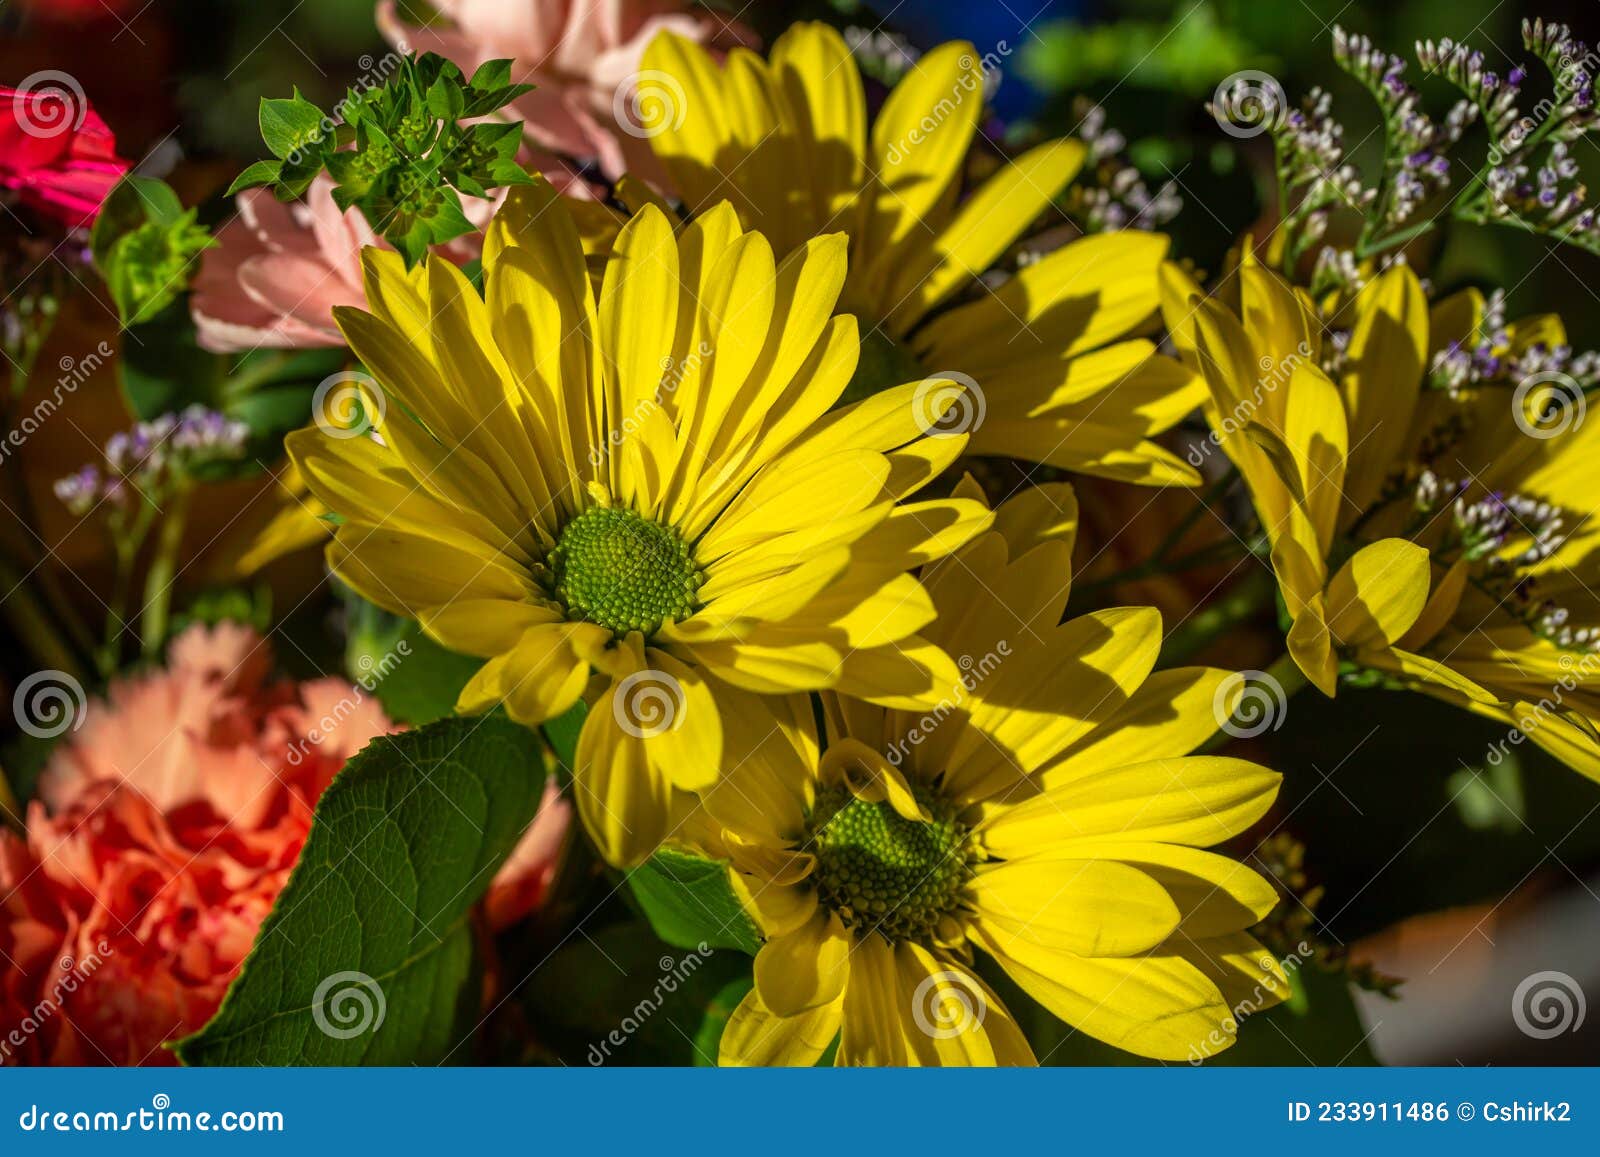 macro view of yellow aster flower blossoms